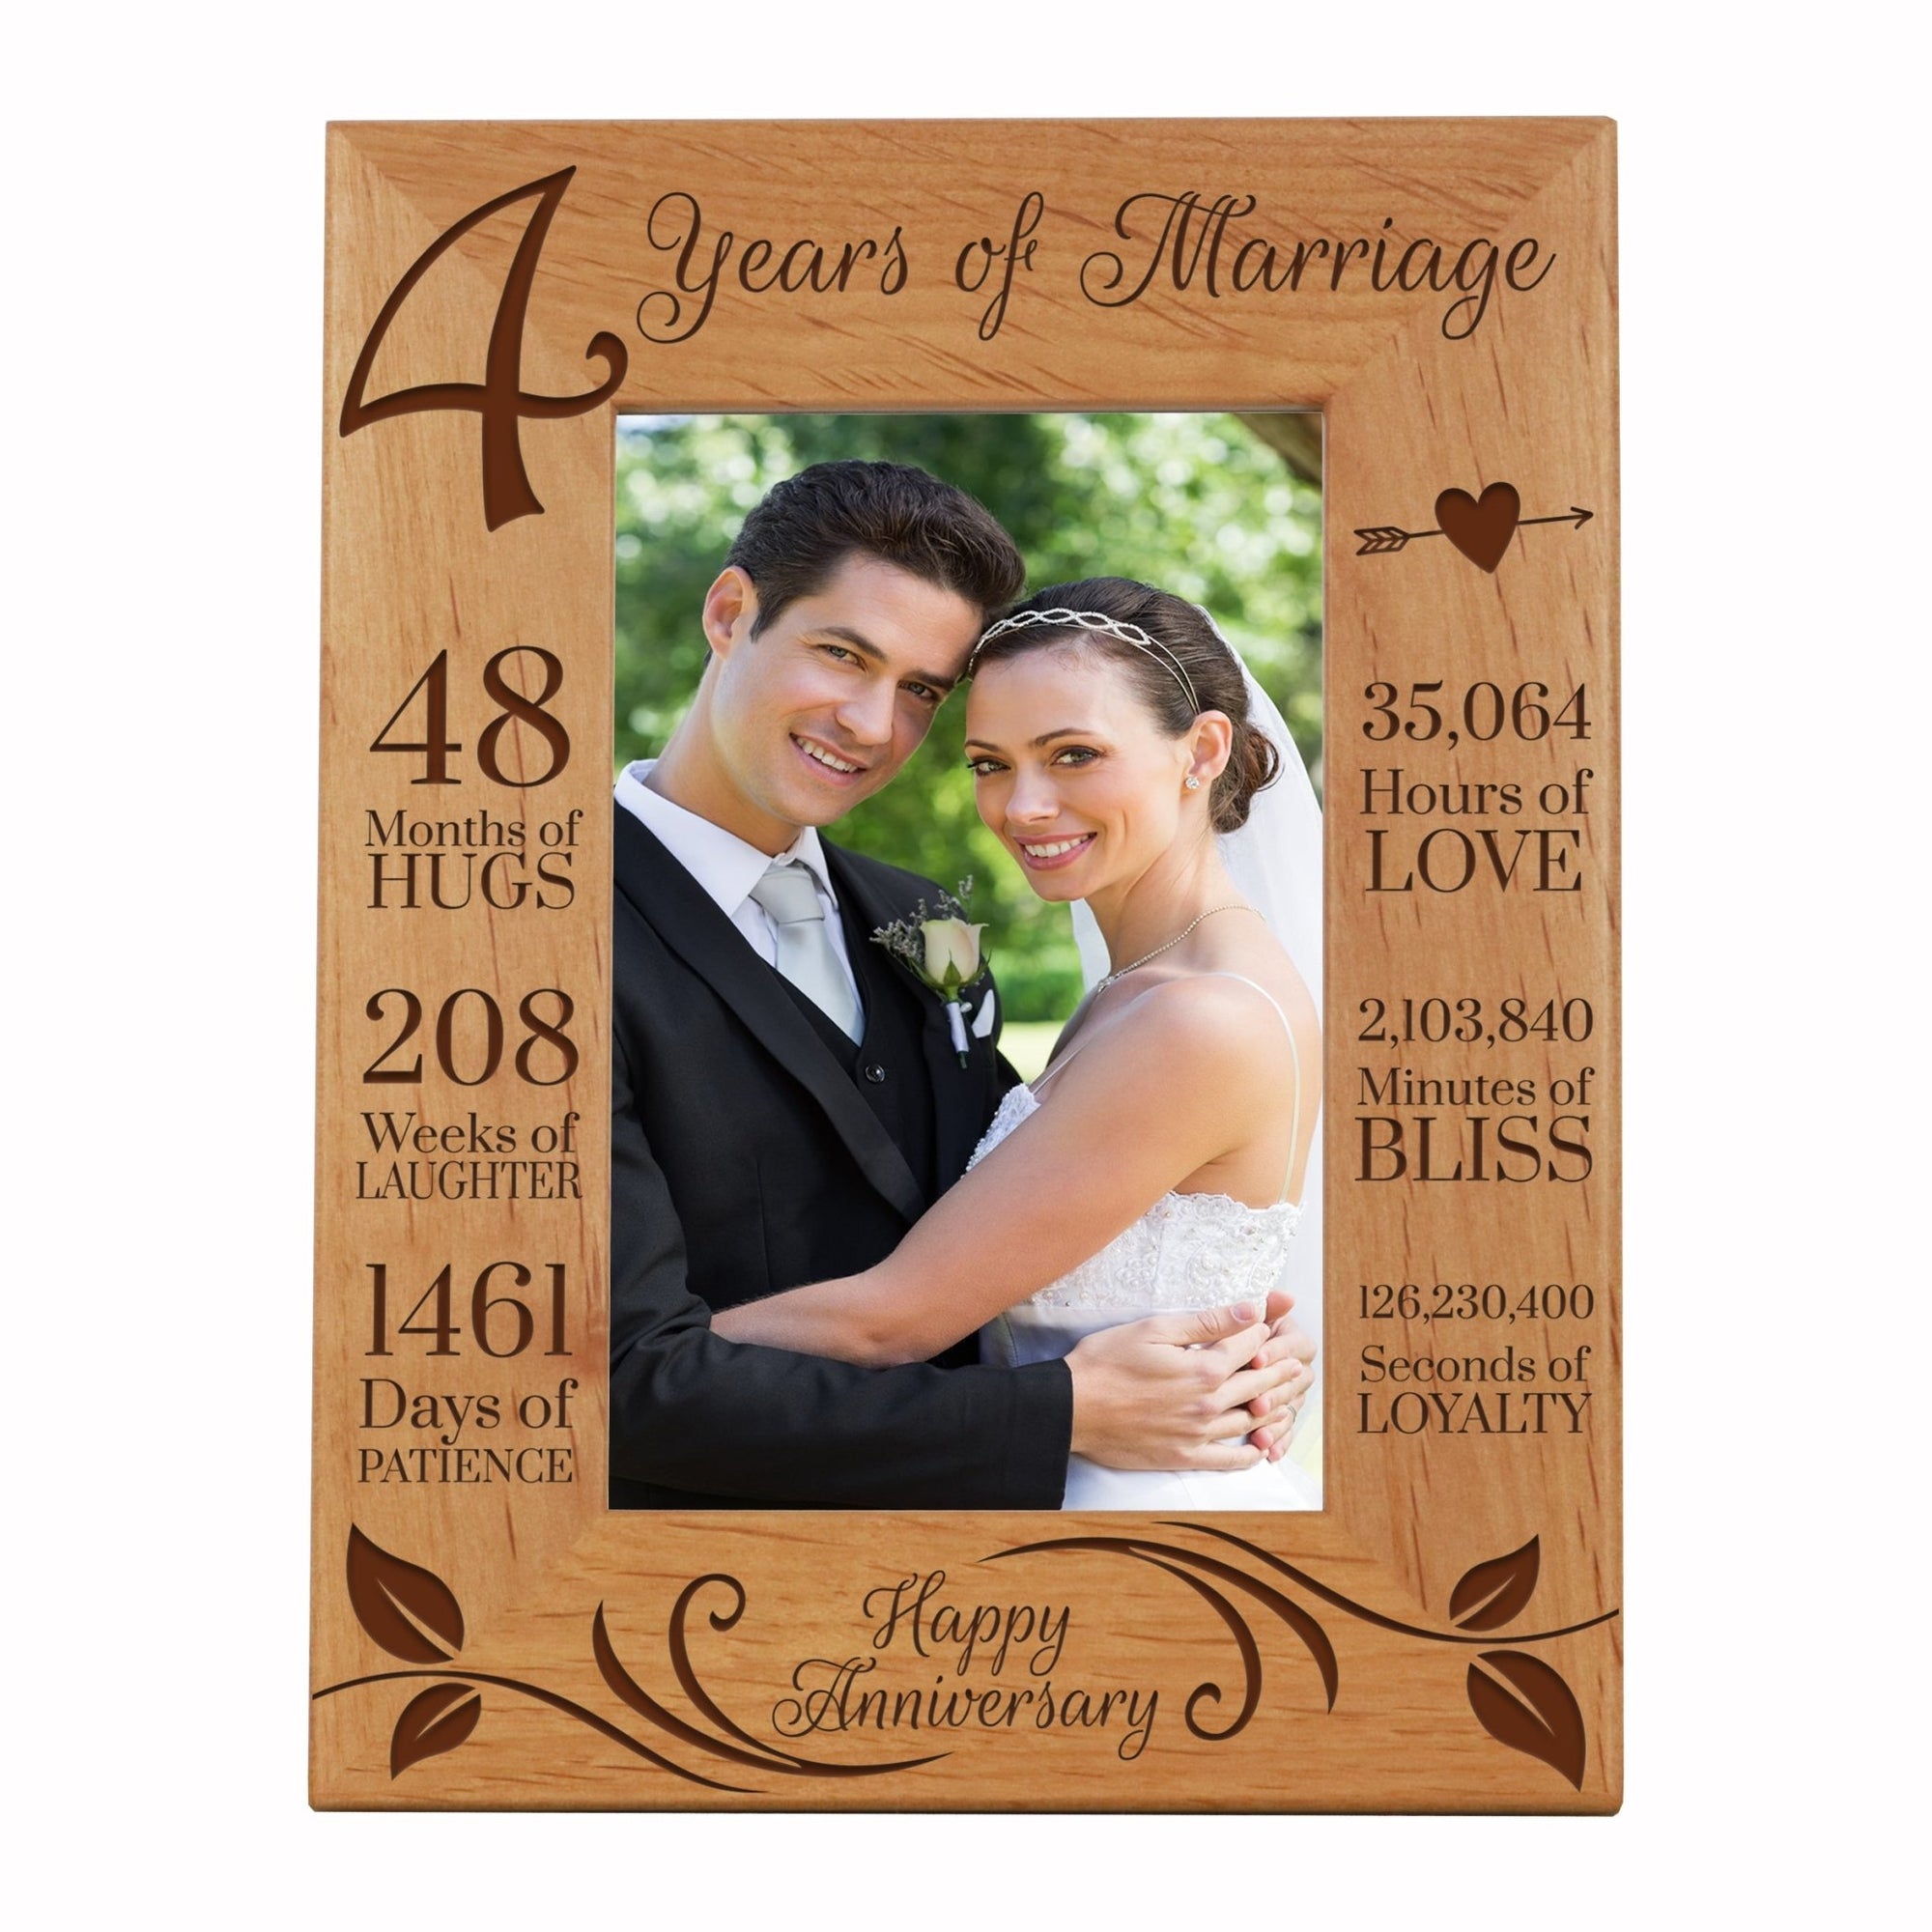 Lifesong Milestones Engraved 4th Wedding Anniversary Photo Frame Wall Decor Gift for Couples